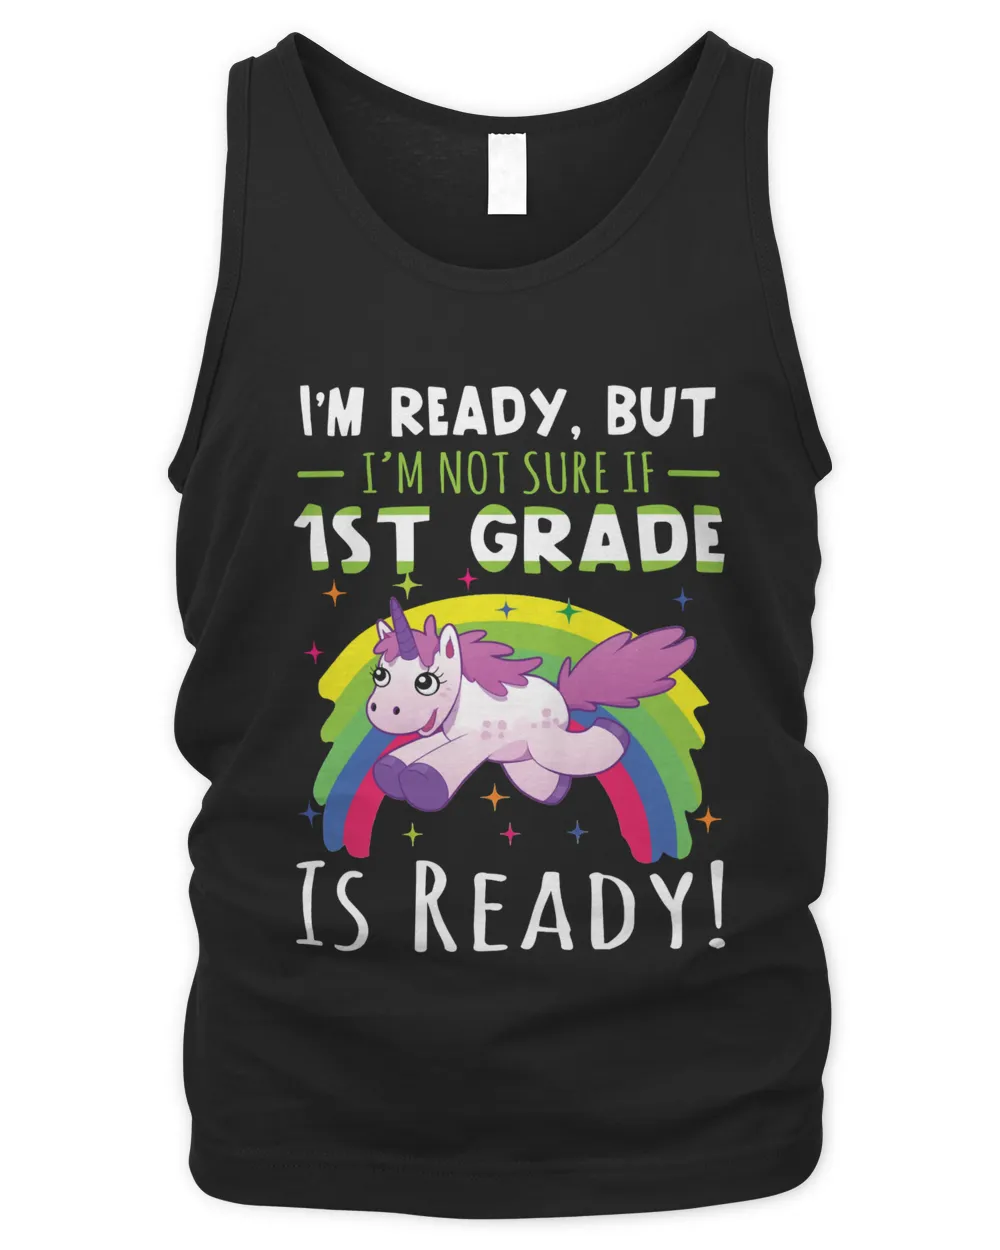 I'm ready, but I'm not sure if 1st grade is ready!